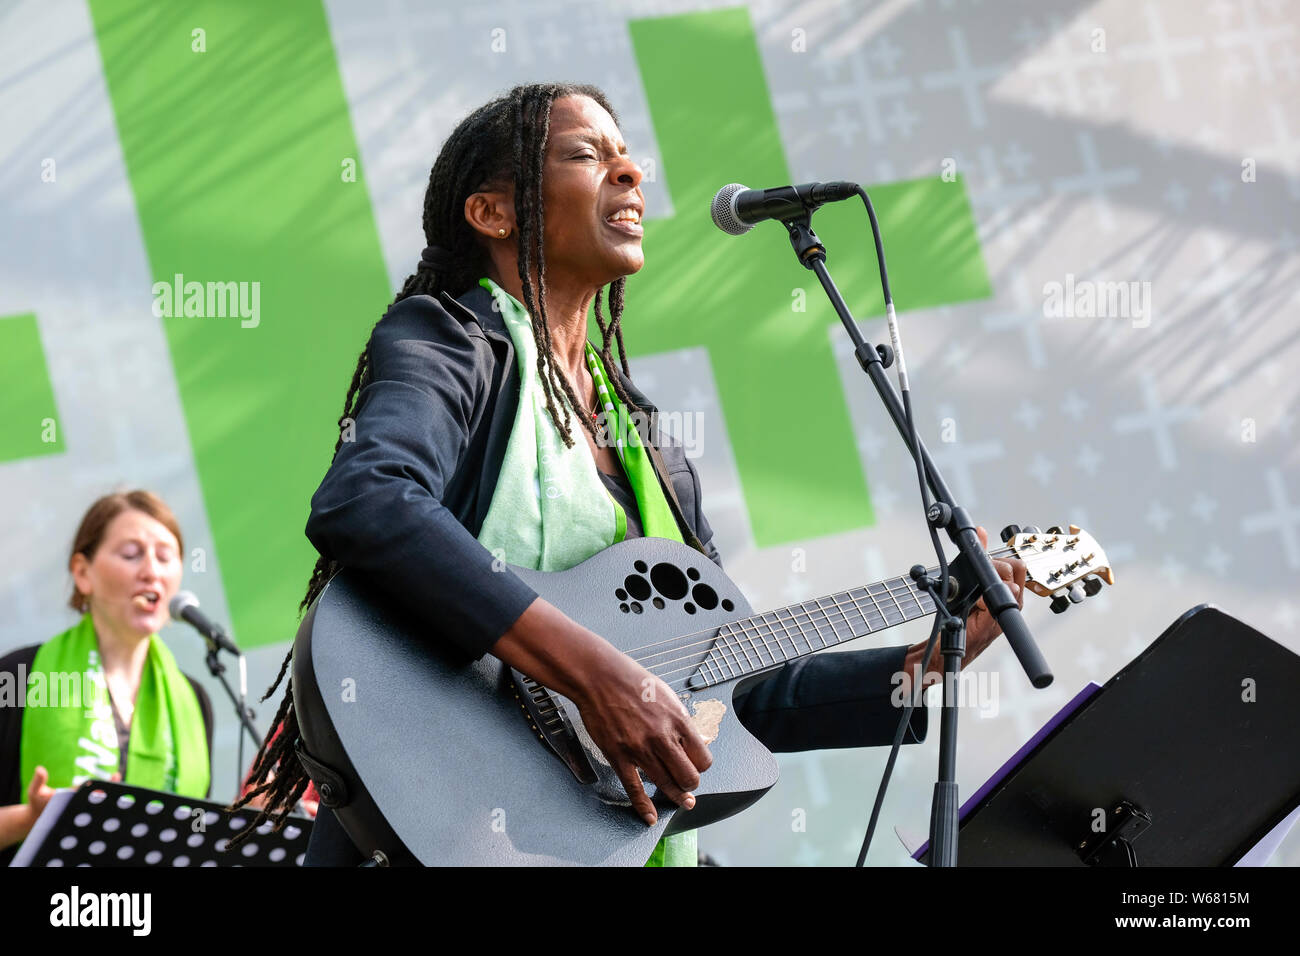 Concert of the Caribbean christian reaggae, rock and pop singer JUDY BAILEY at the German Protestant Church Congress 2019 in Dortmund/Germany. Judy Bailey lives in Germany. Stock Photo